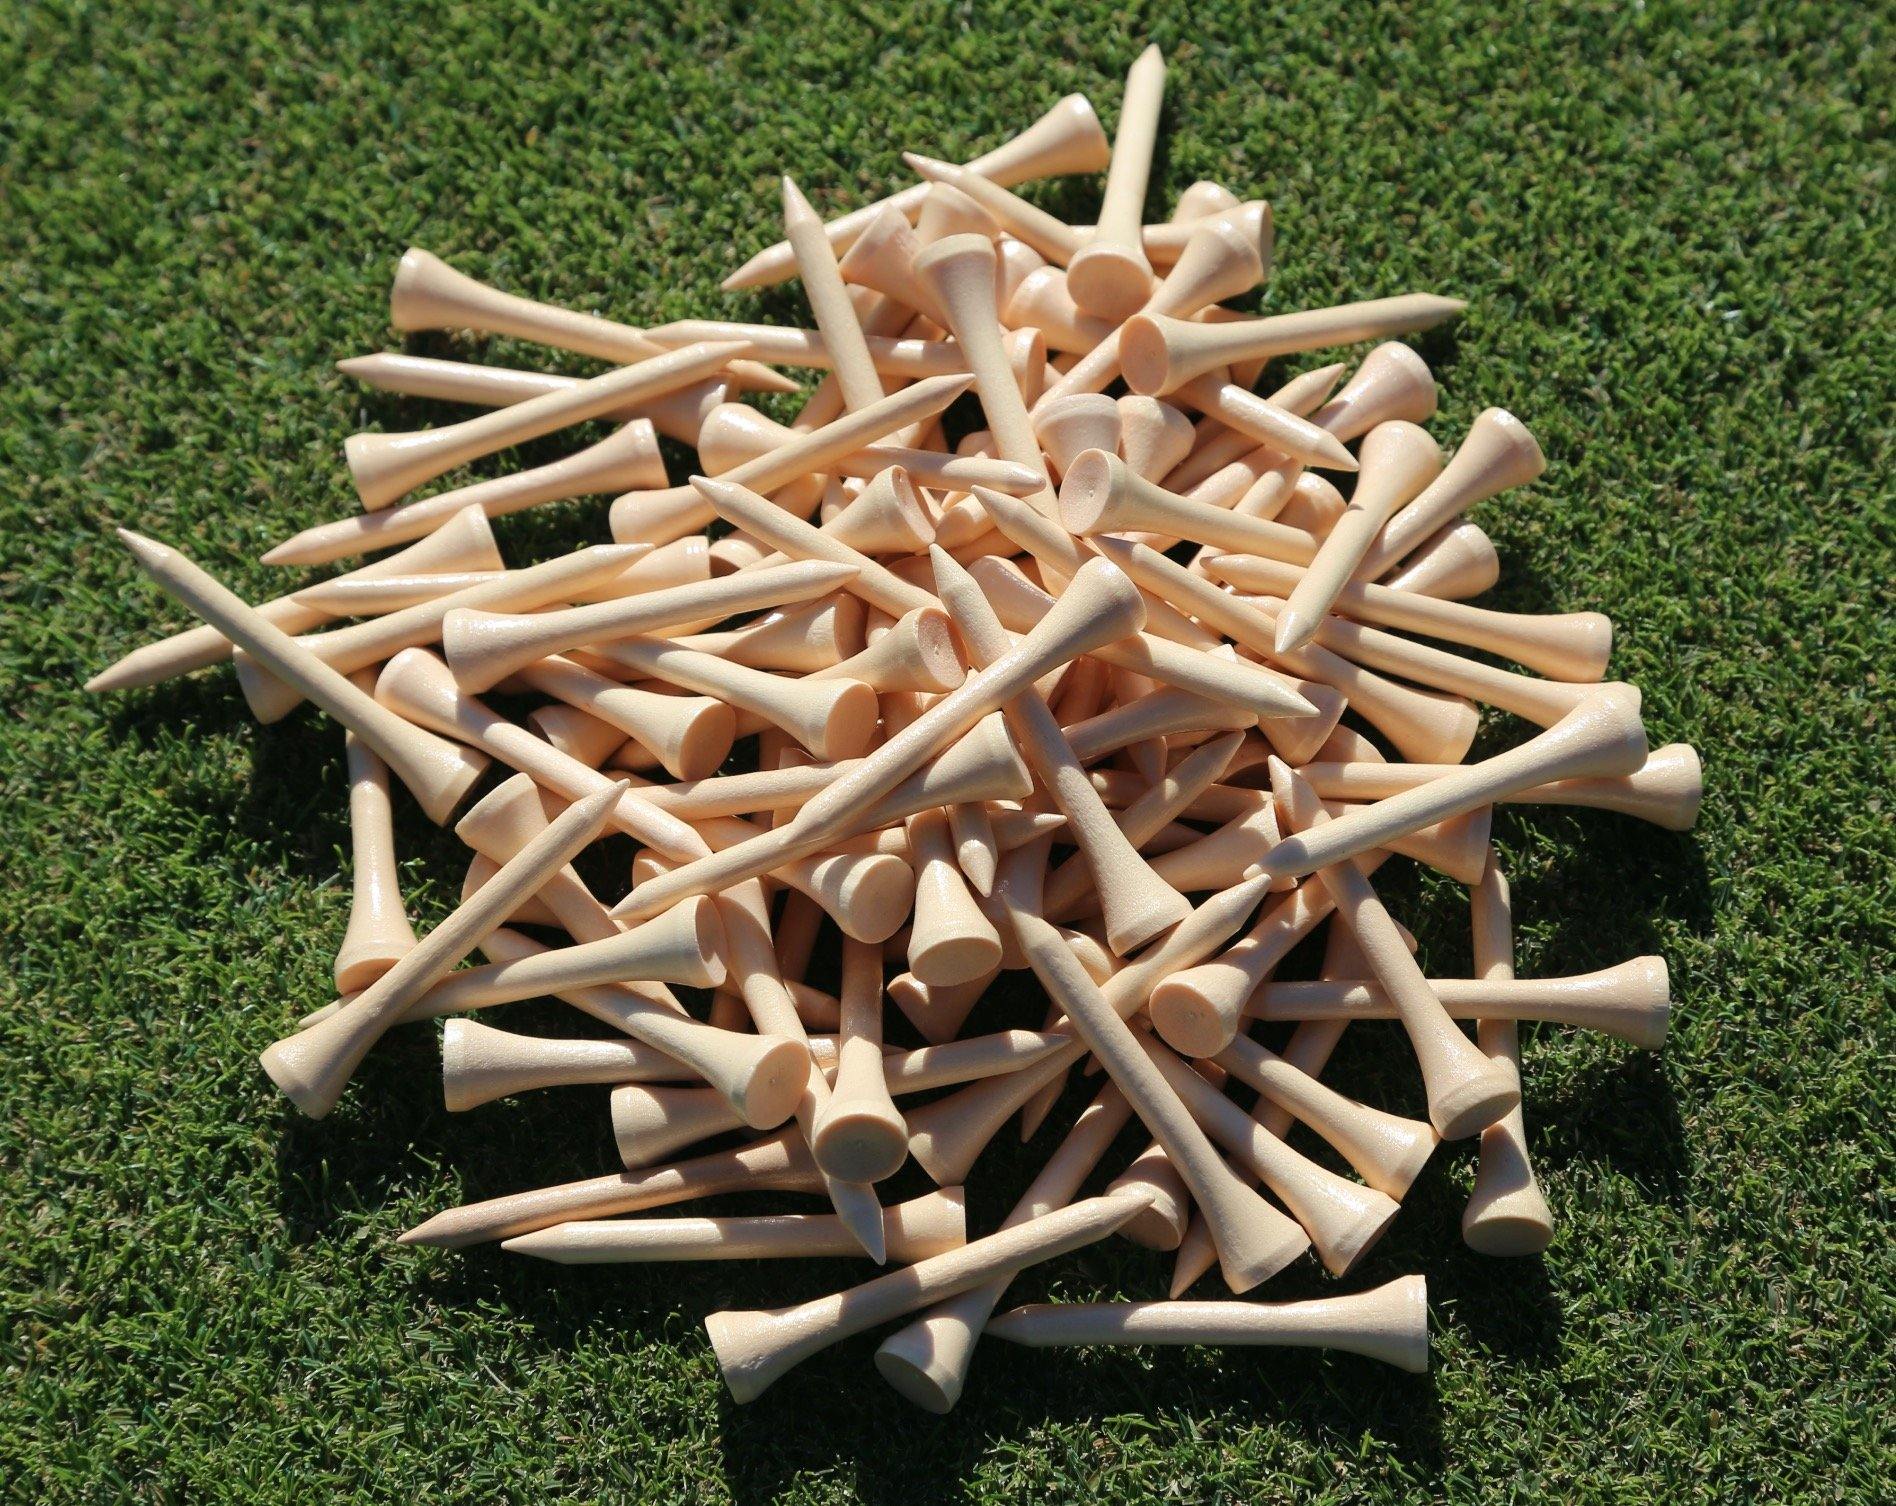 Bamboo Golf Tees - Golf and Leisure